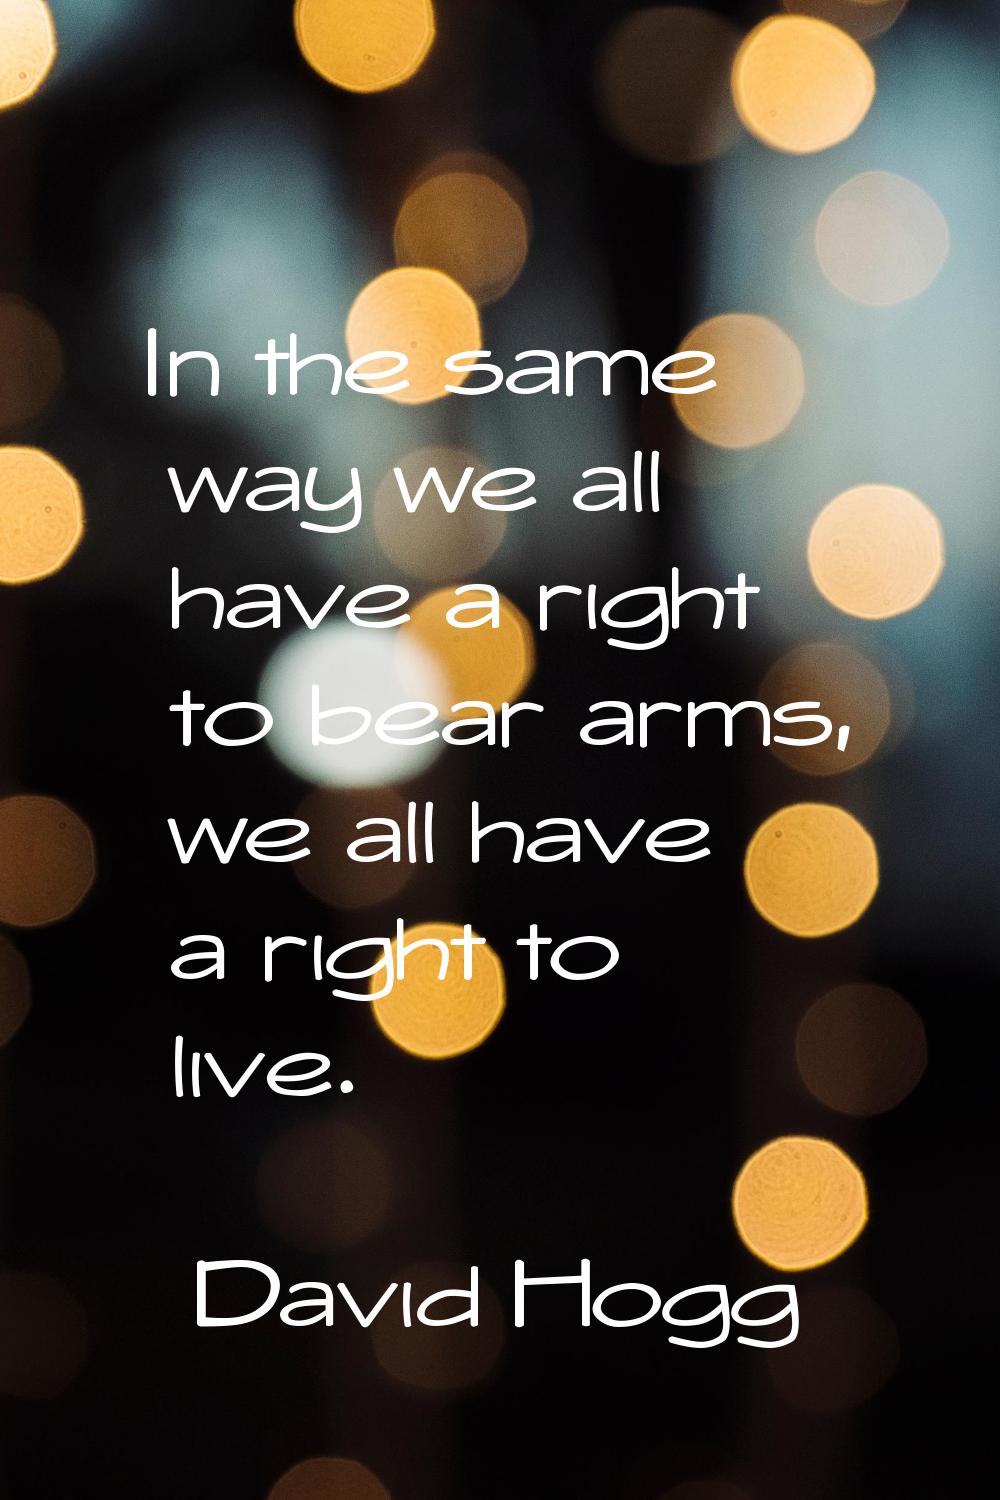 In the same way we all have a right to bear arms, we all have a right to live.